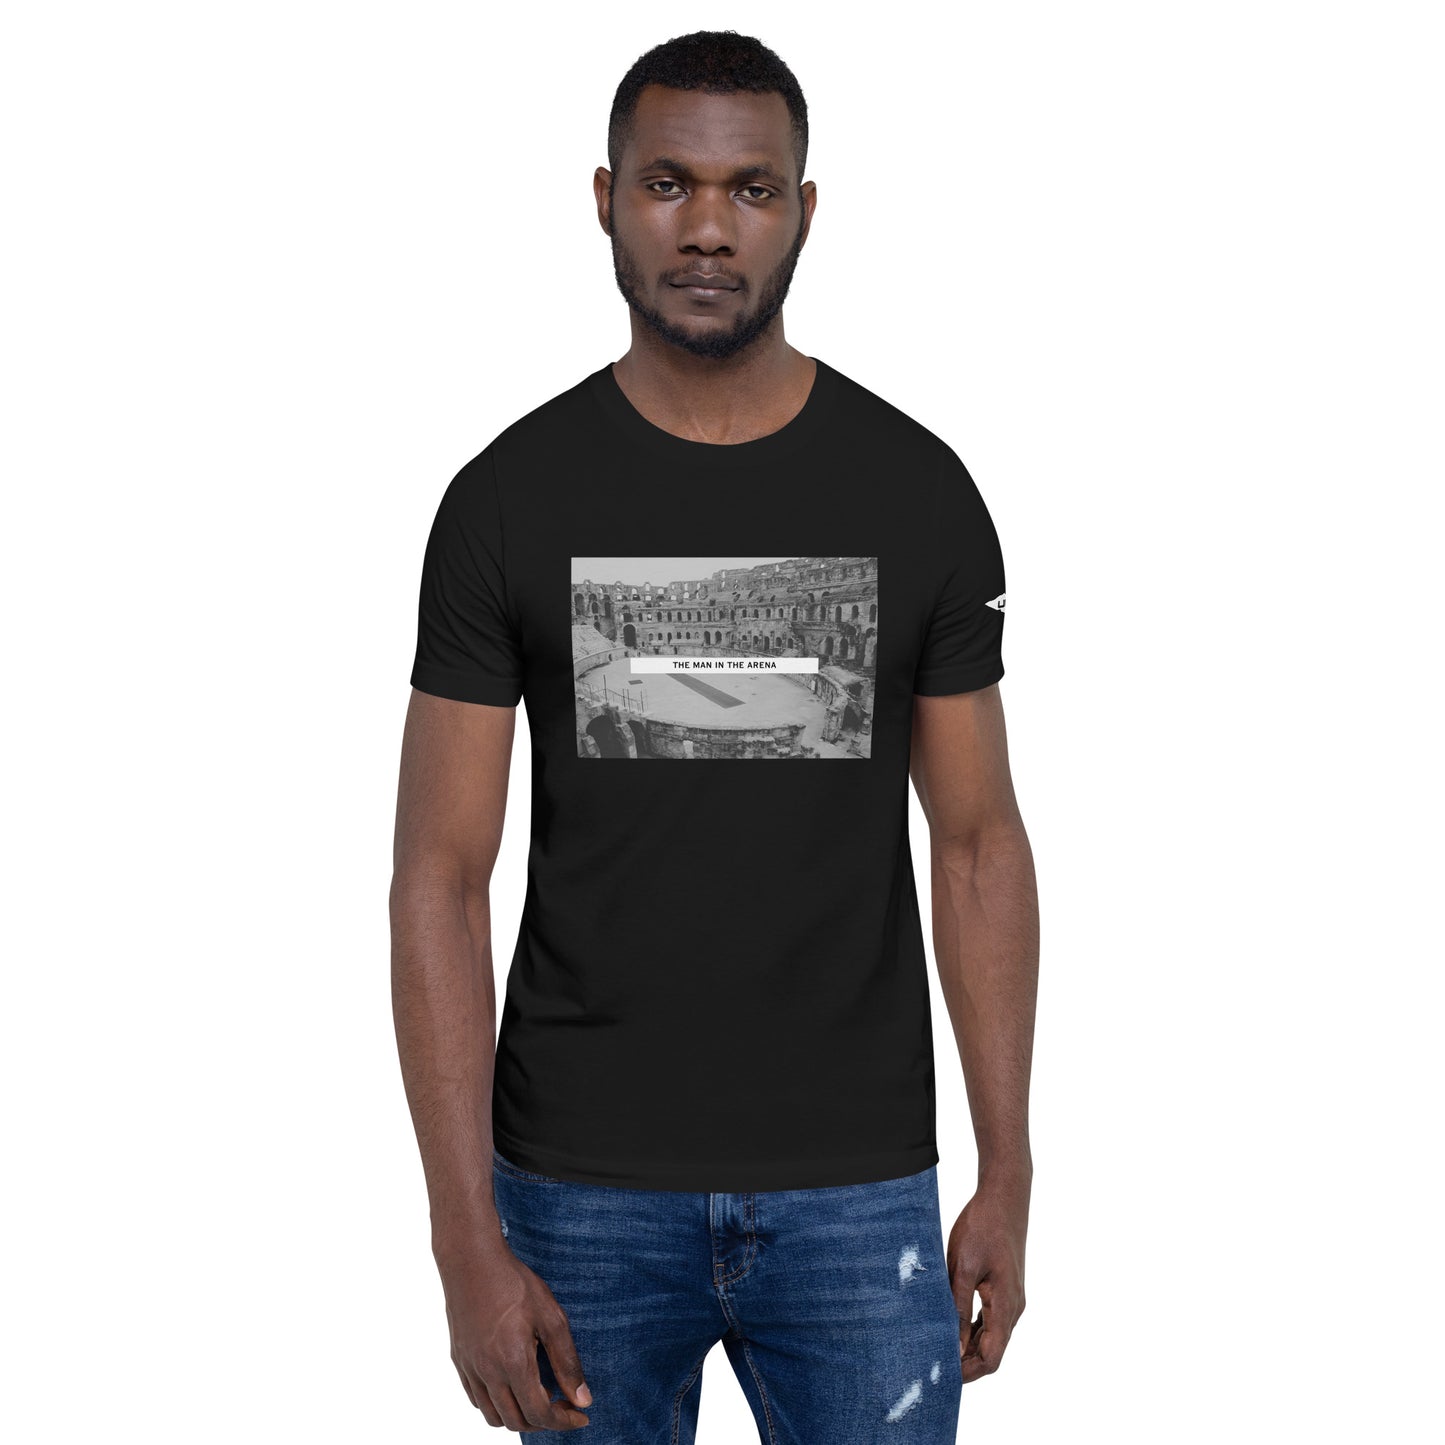 Man in the Arena t-shirt. Inspired by Theodore Roosevelt's Citizenship in a Republic speech, black graphic shirt.